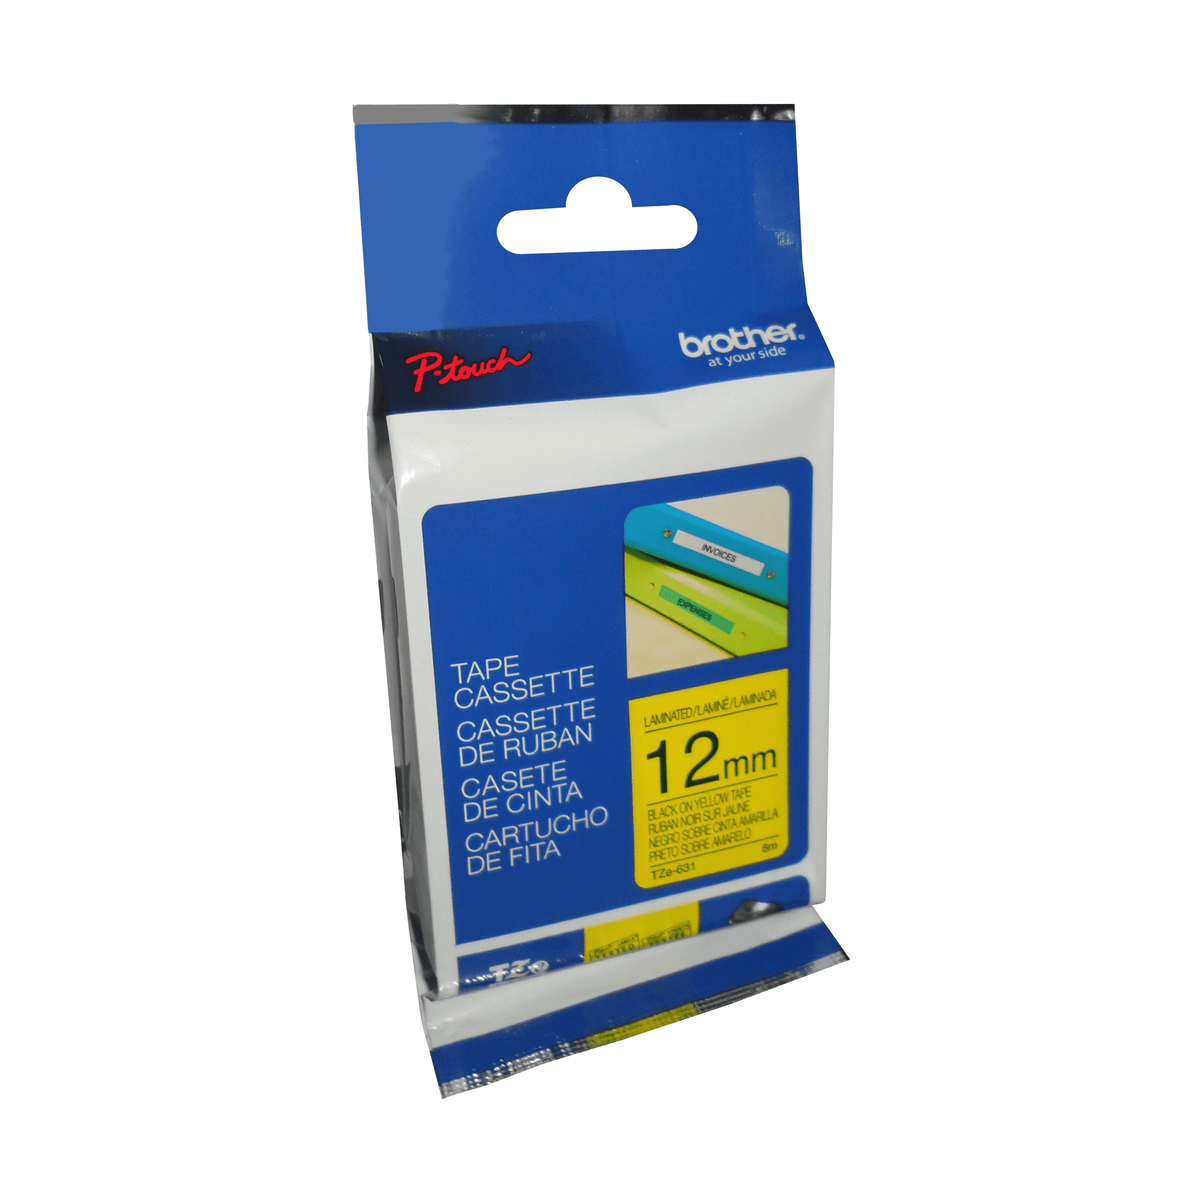 Brother Genuine TZe631 Black on Yellow Laminated Tape for P-touch Label Makers, 12 mm wide x 8 m long - toners.ca